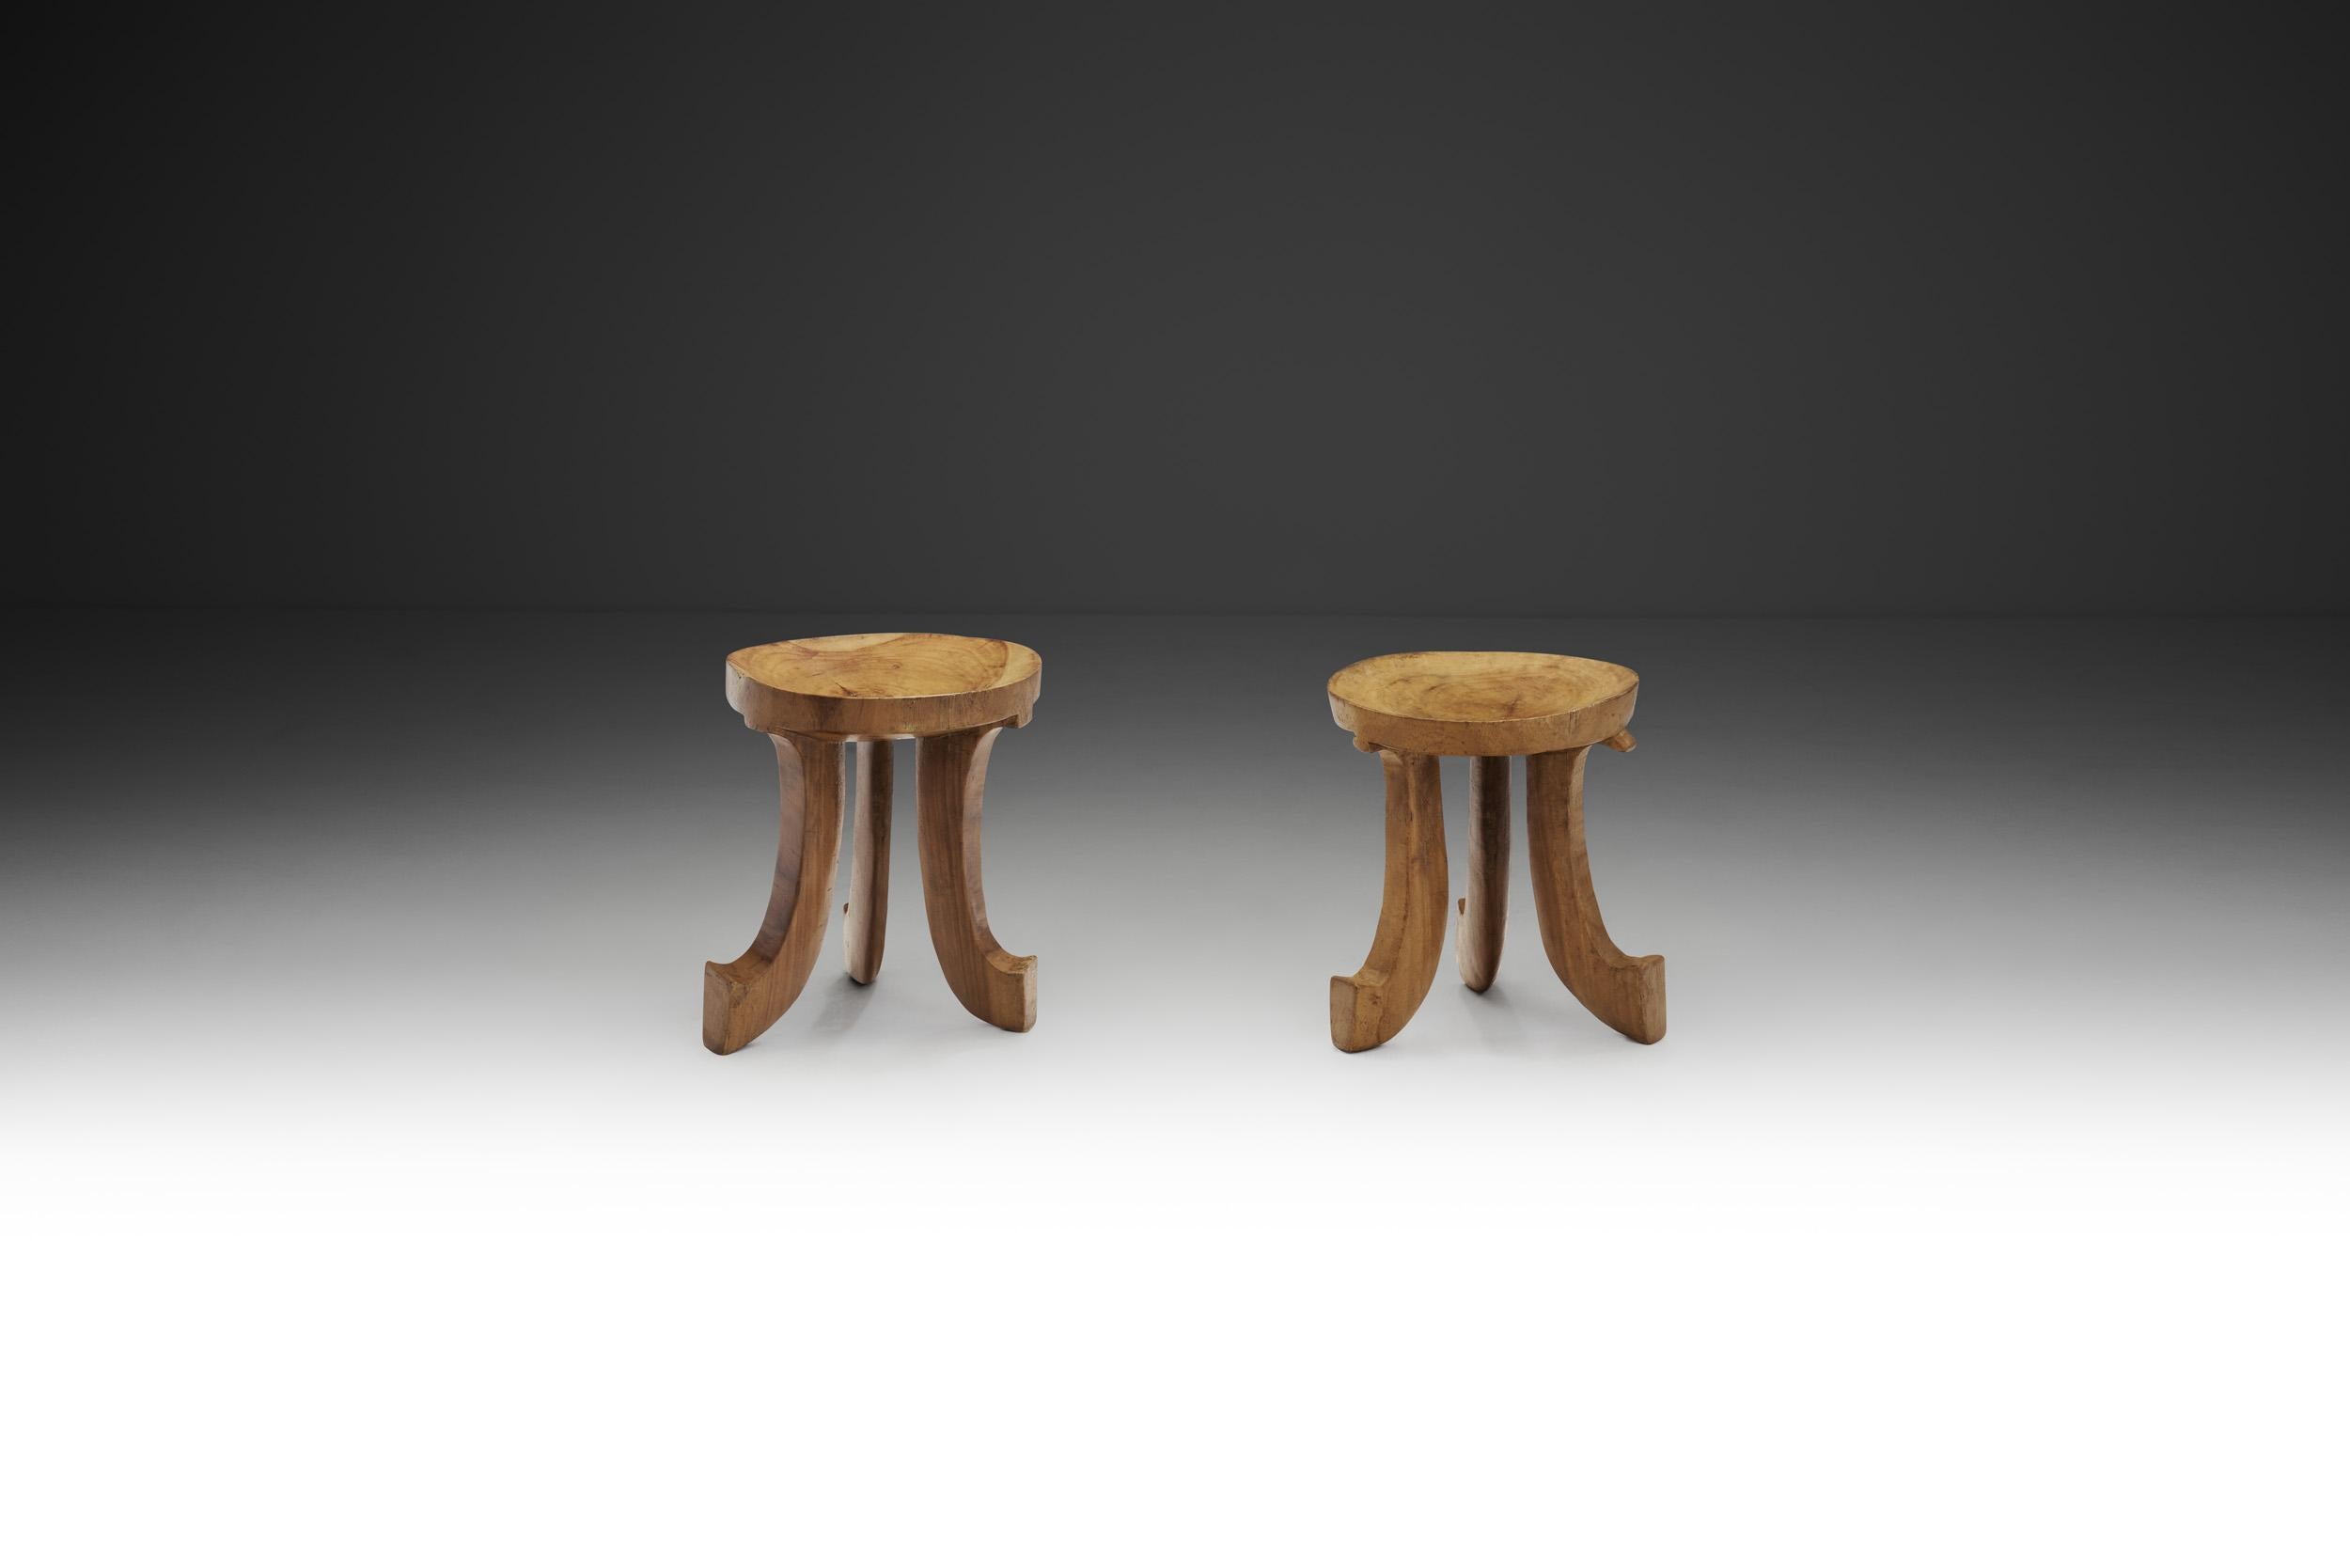 Norwegian Ethiopian-Style Stool with Scrolled Legs, Norway, First Half of the 20th Century